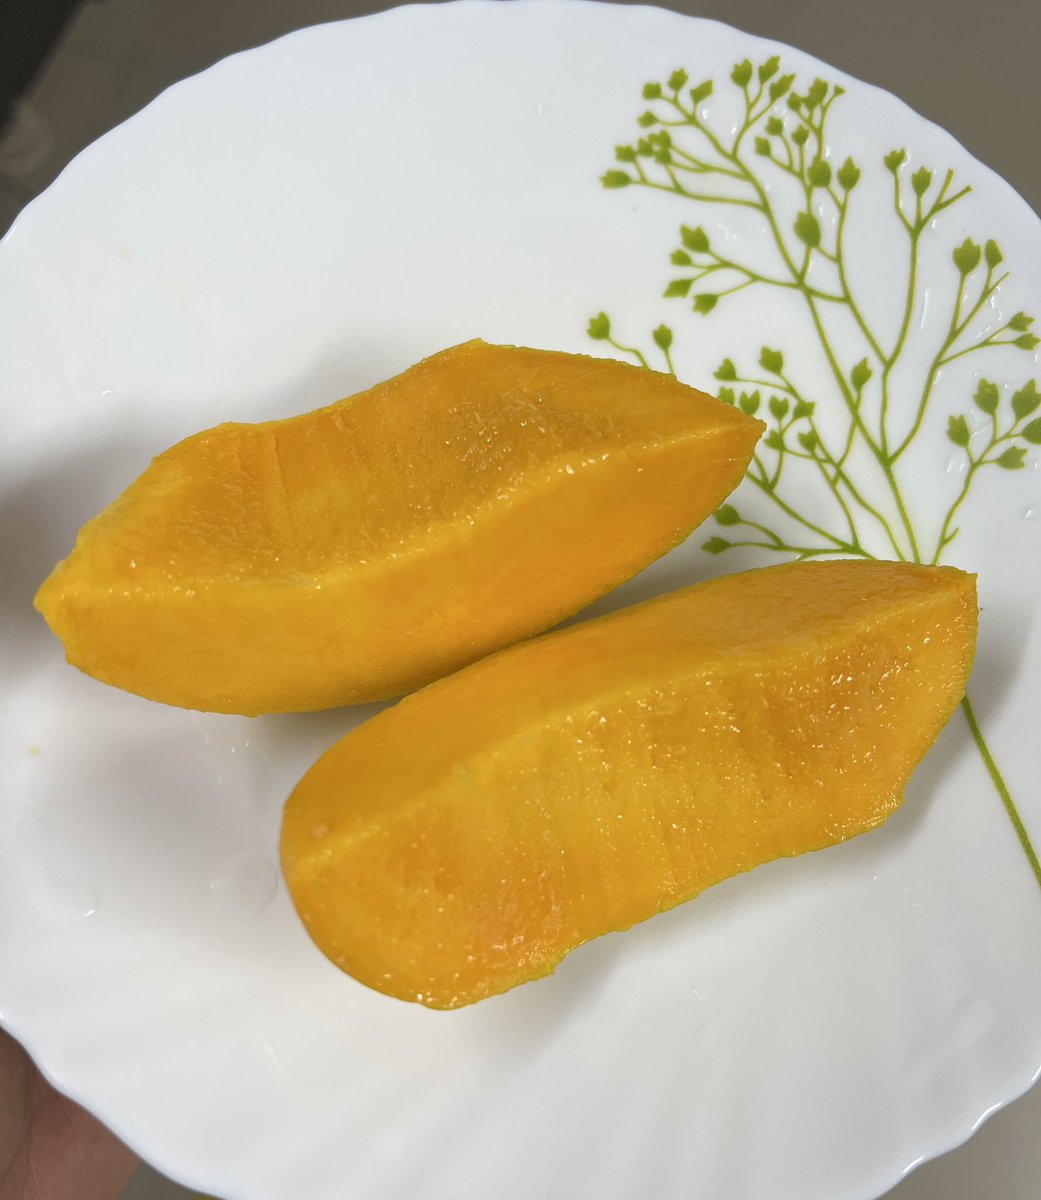 Delicious mangoes: rich in vitamins, fiber, antioxidants, aid digestion, promote skin health. 
Stay healthy with #MangoLove! 🥭🌟

75 grams Mango ~ 45 Calories